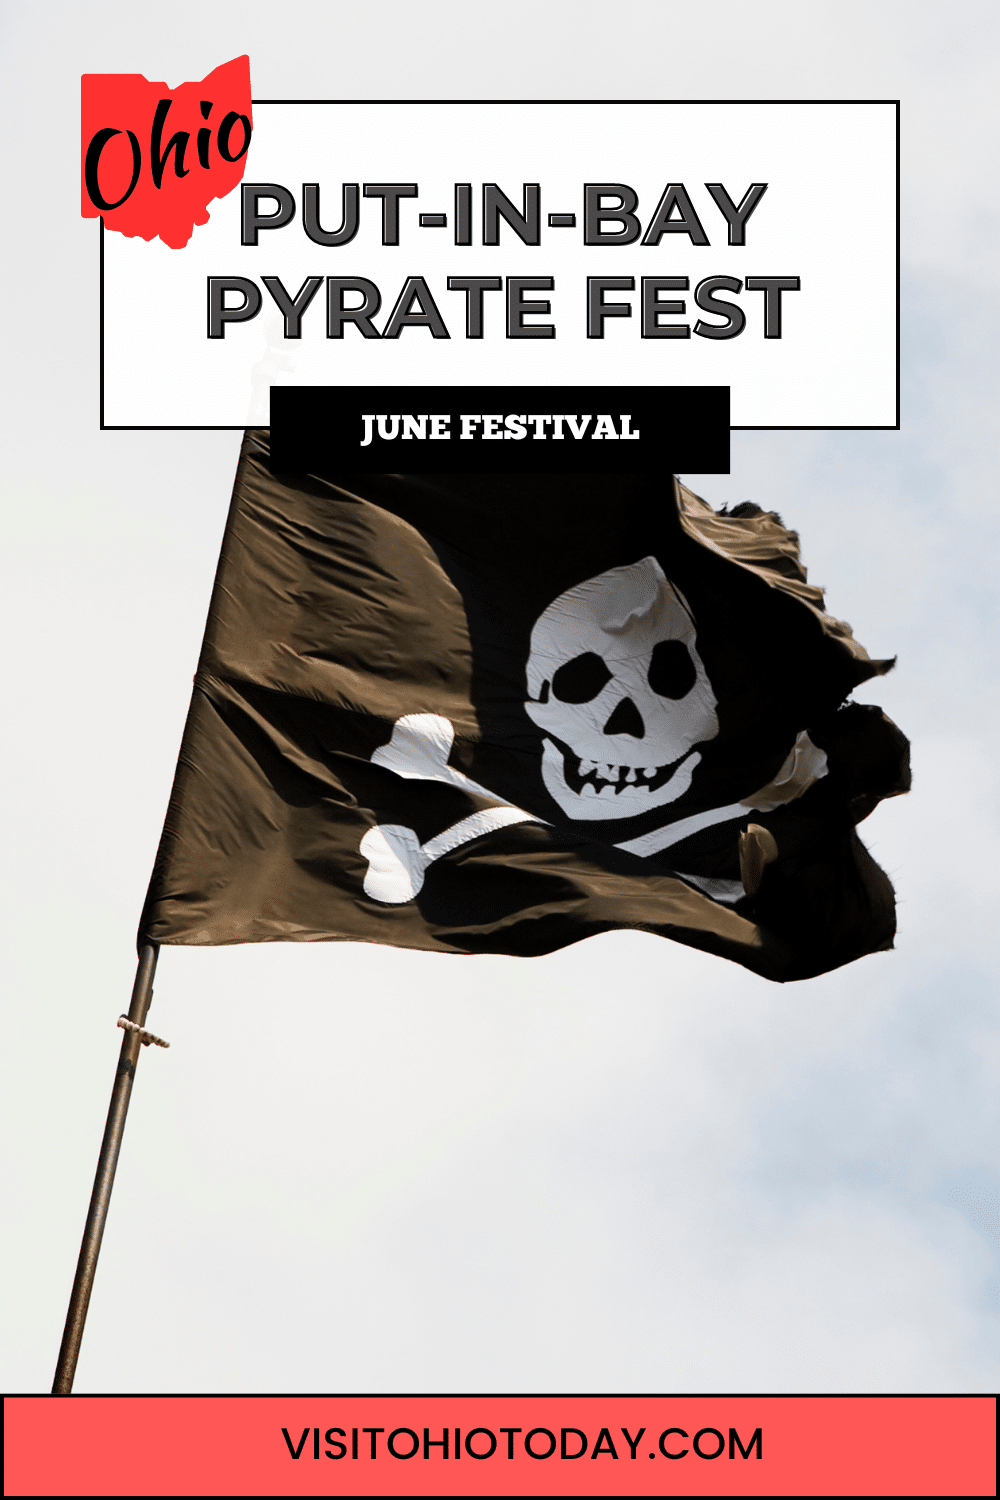 Put-in-Bay Pyrate Fest is an annual pirate-themed event that will take place at the end of June at DeRivera Park in Put-in-Bay.